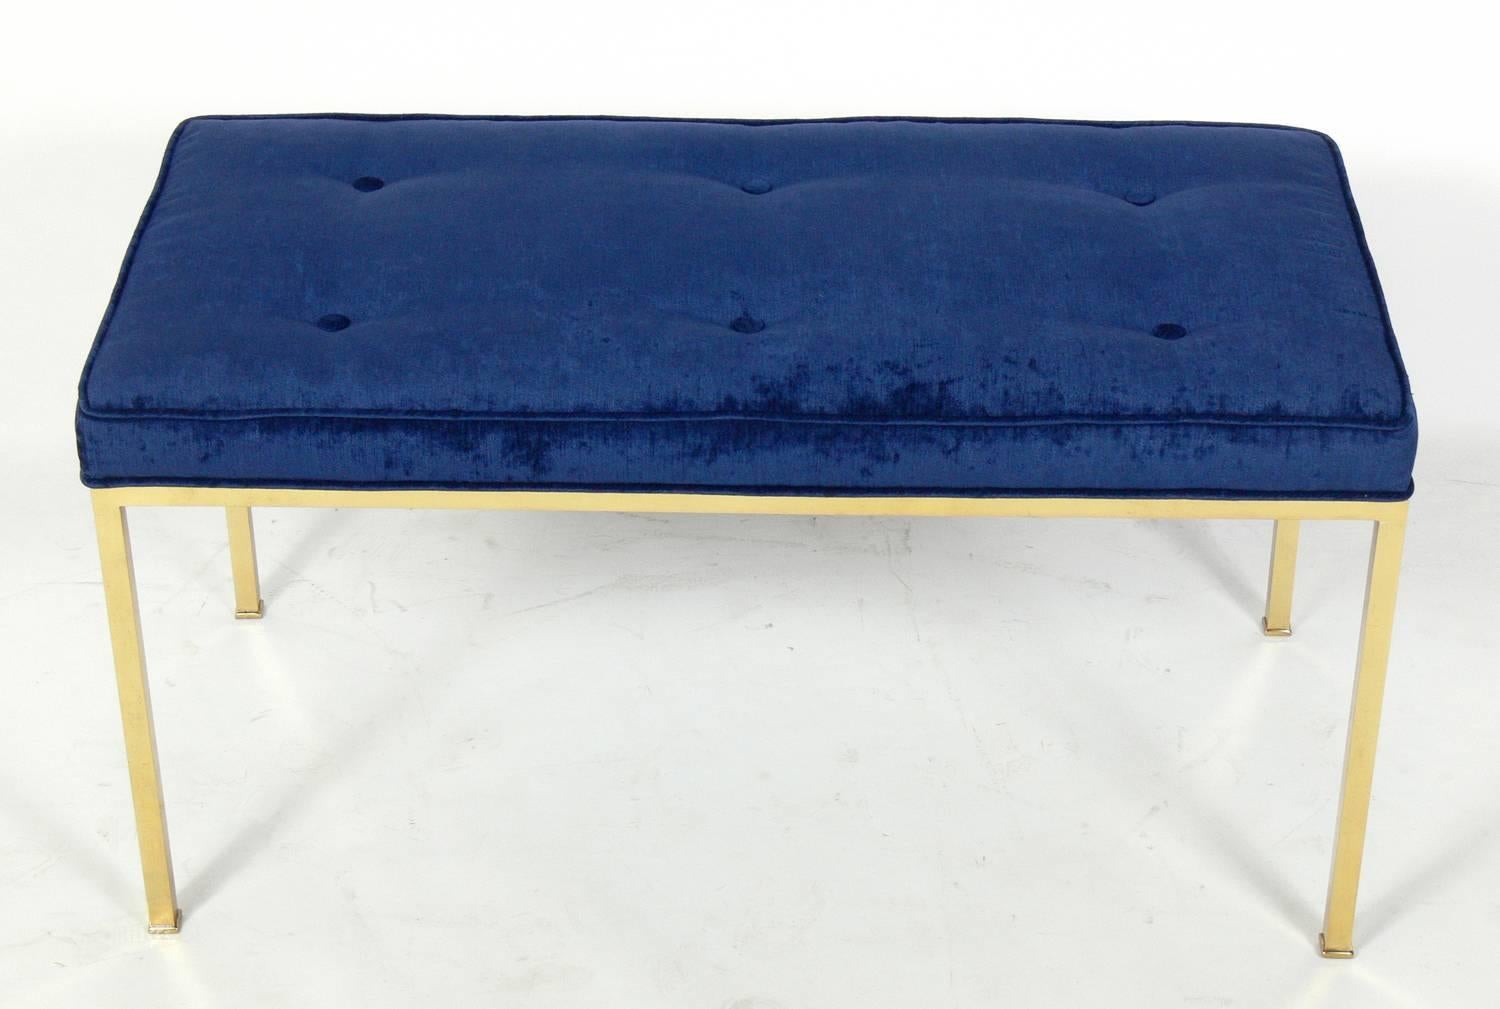 Clean lined brass bench in the manner of Edward Wormley for Dunbar, American, circa 1960s. It has been reupholstered in an indigo blue color velvety fabric.